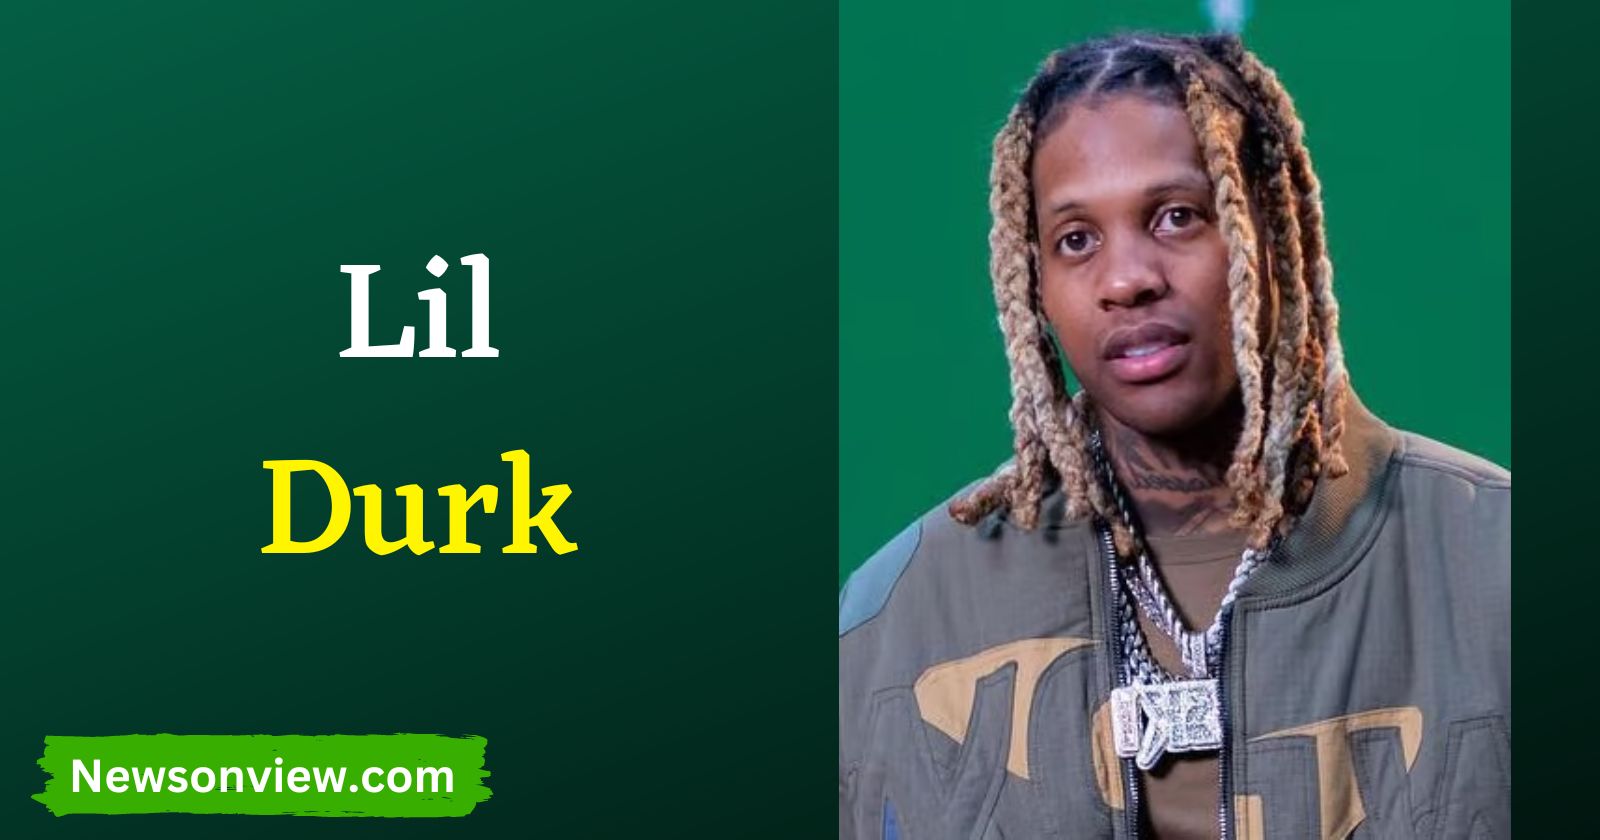 Lil Durk Wikipedia, Height, Age, Girlfriend, Relationship, Family, Net worth, Tour, Tickets, Instagram & More